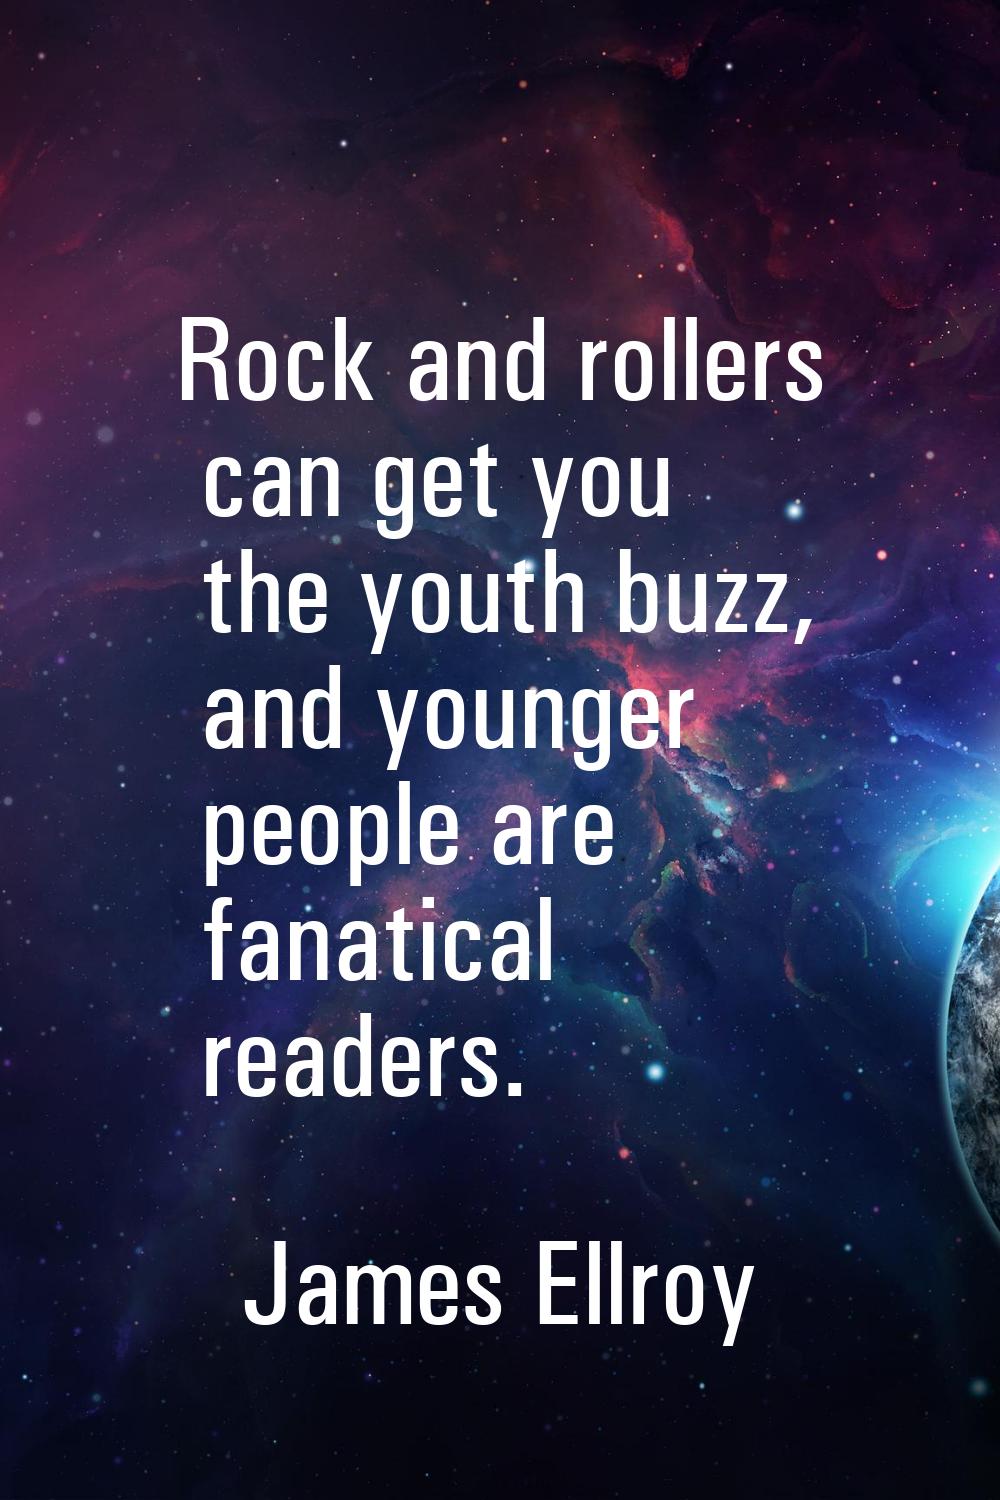 Rock and rollers can get you the youth buzz, and younger people are fanatical readers.